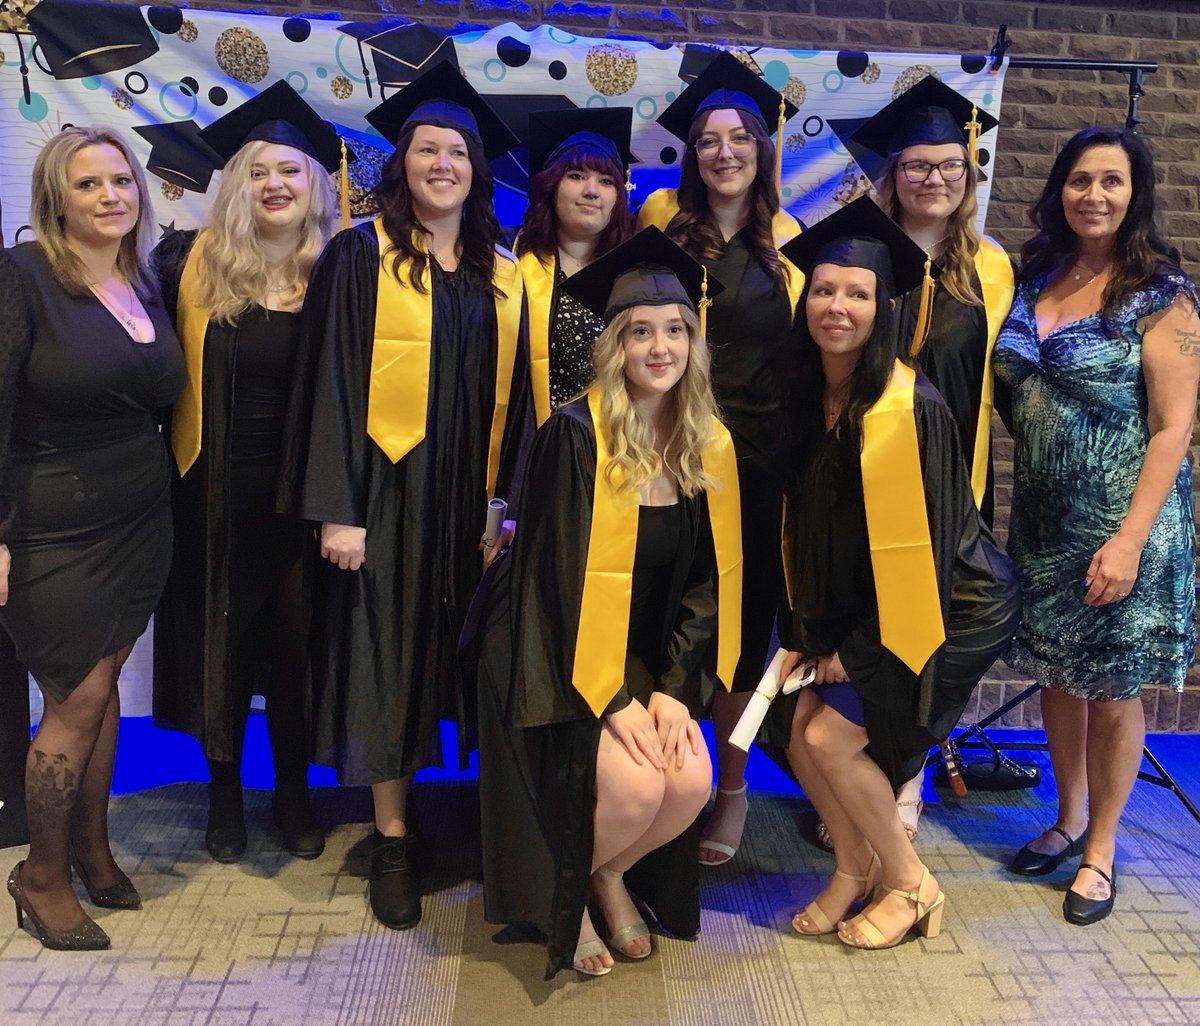 Congratulations to our amazing Animal Grooming graduates! 🎓🐾 Your hard work and dedication to developing your practical skills have prepared you to make a major difference for pets in your communities. We can't wait to see where your careers take you. Well done! 👏